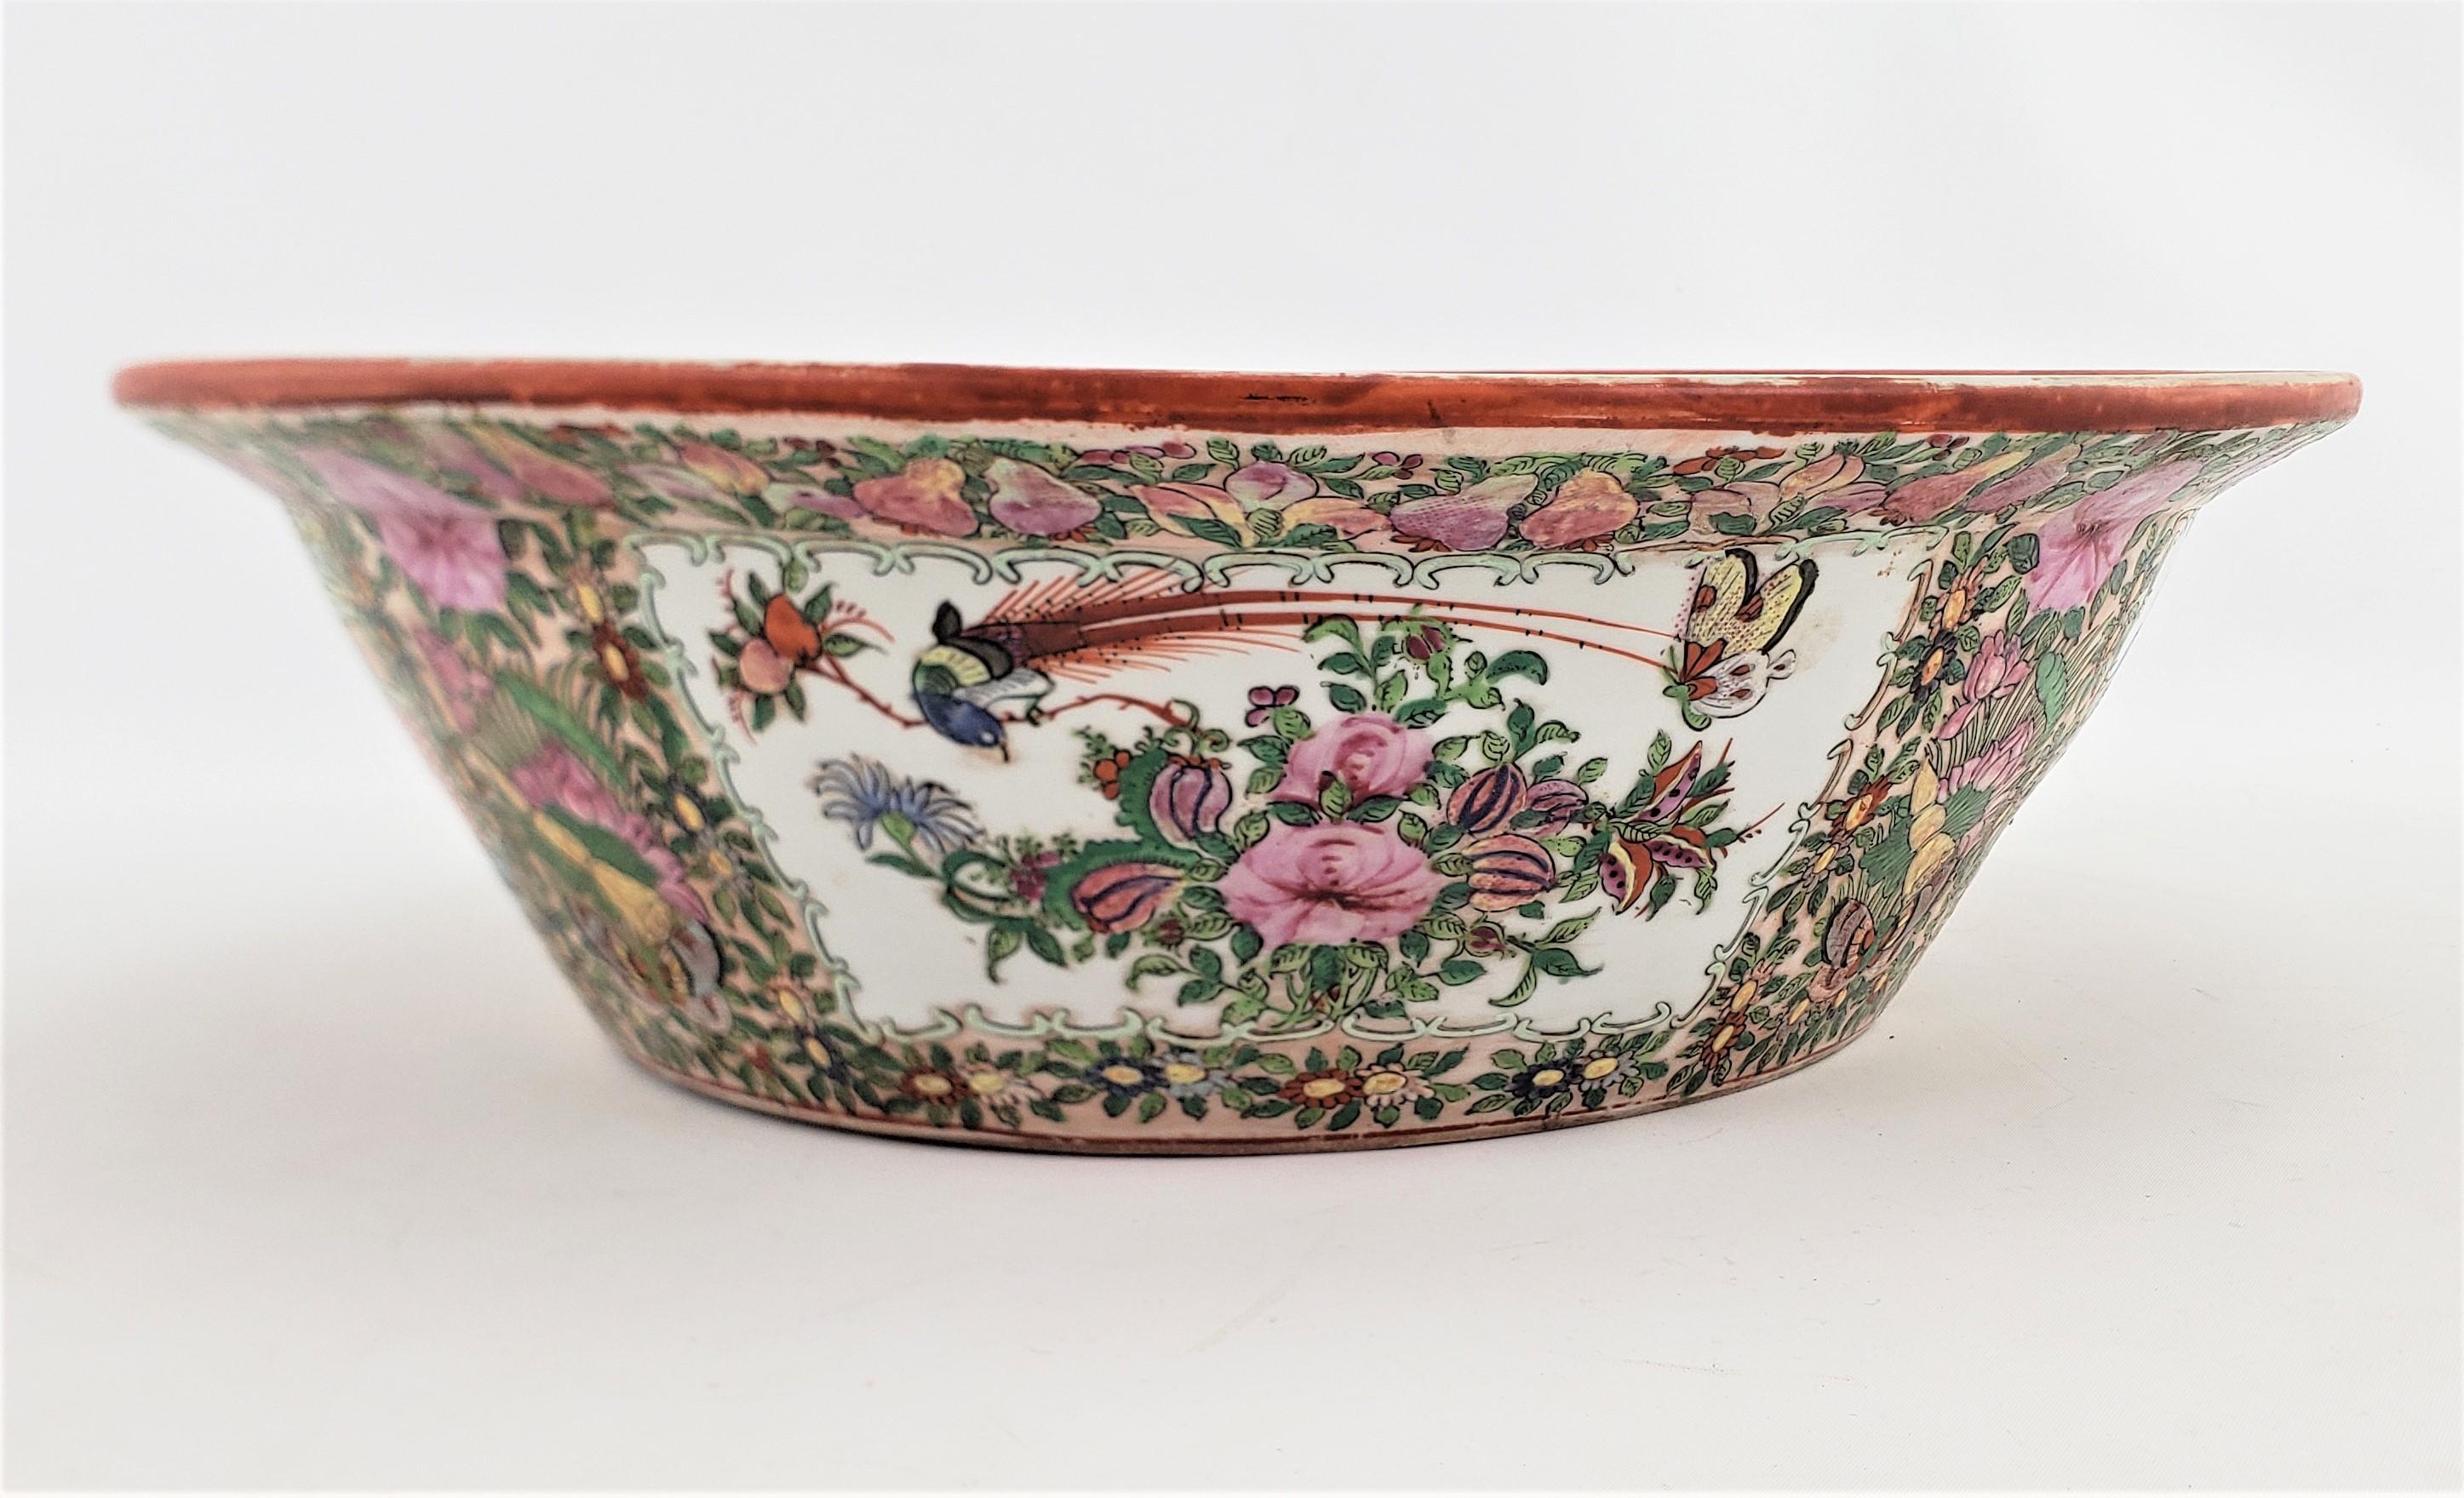 Large Antique Qing Dynasty Famille Rose Elaborately Hand-Painted Bowl or Basin For Sale 1